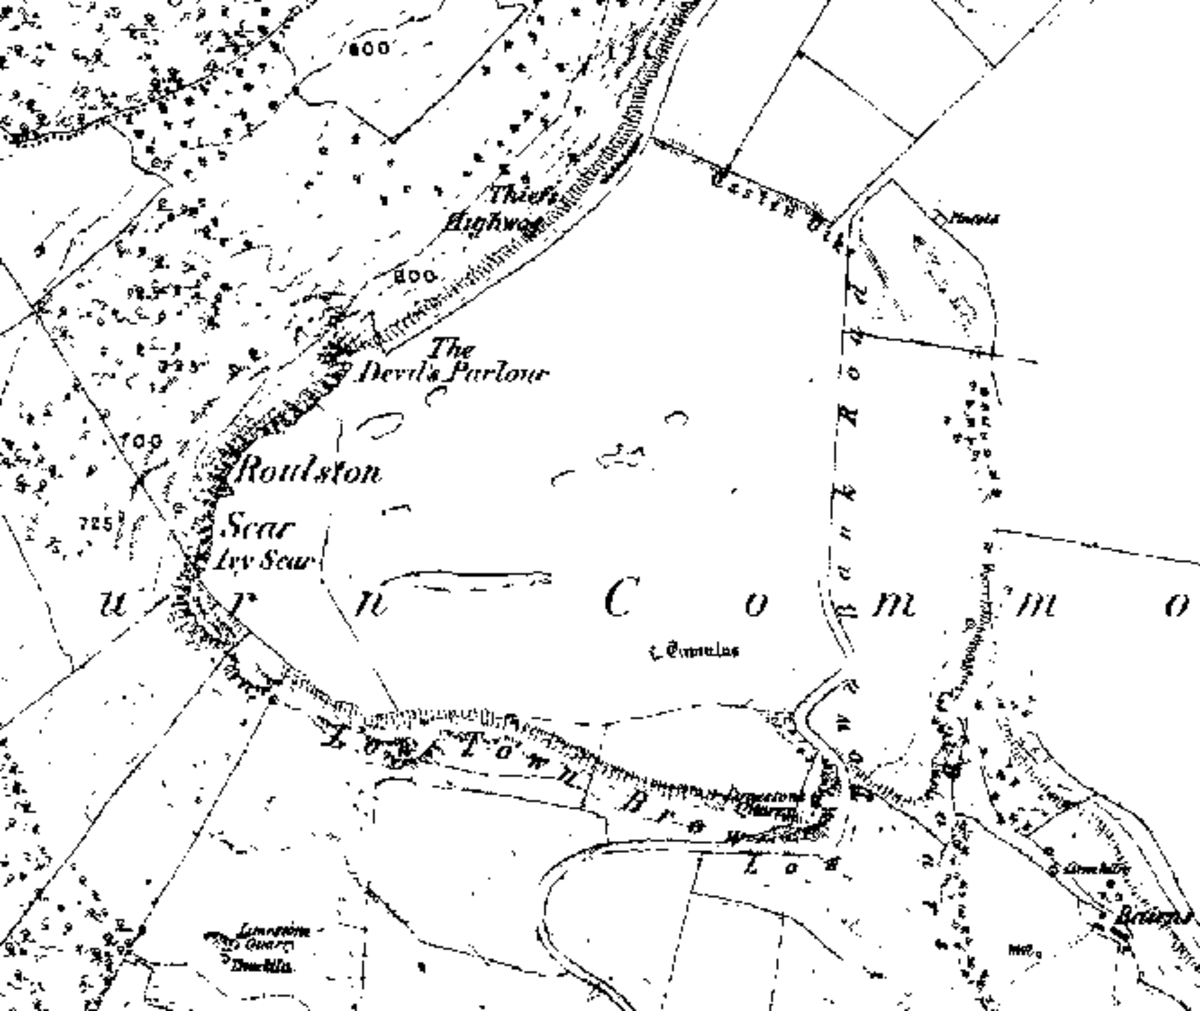 Brigantes Hill Fort marked on an 1850 OS map. The Brigantes, along with the Belgae were warlike Celts who did not easily submit to Roman rule